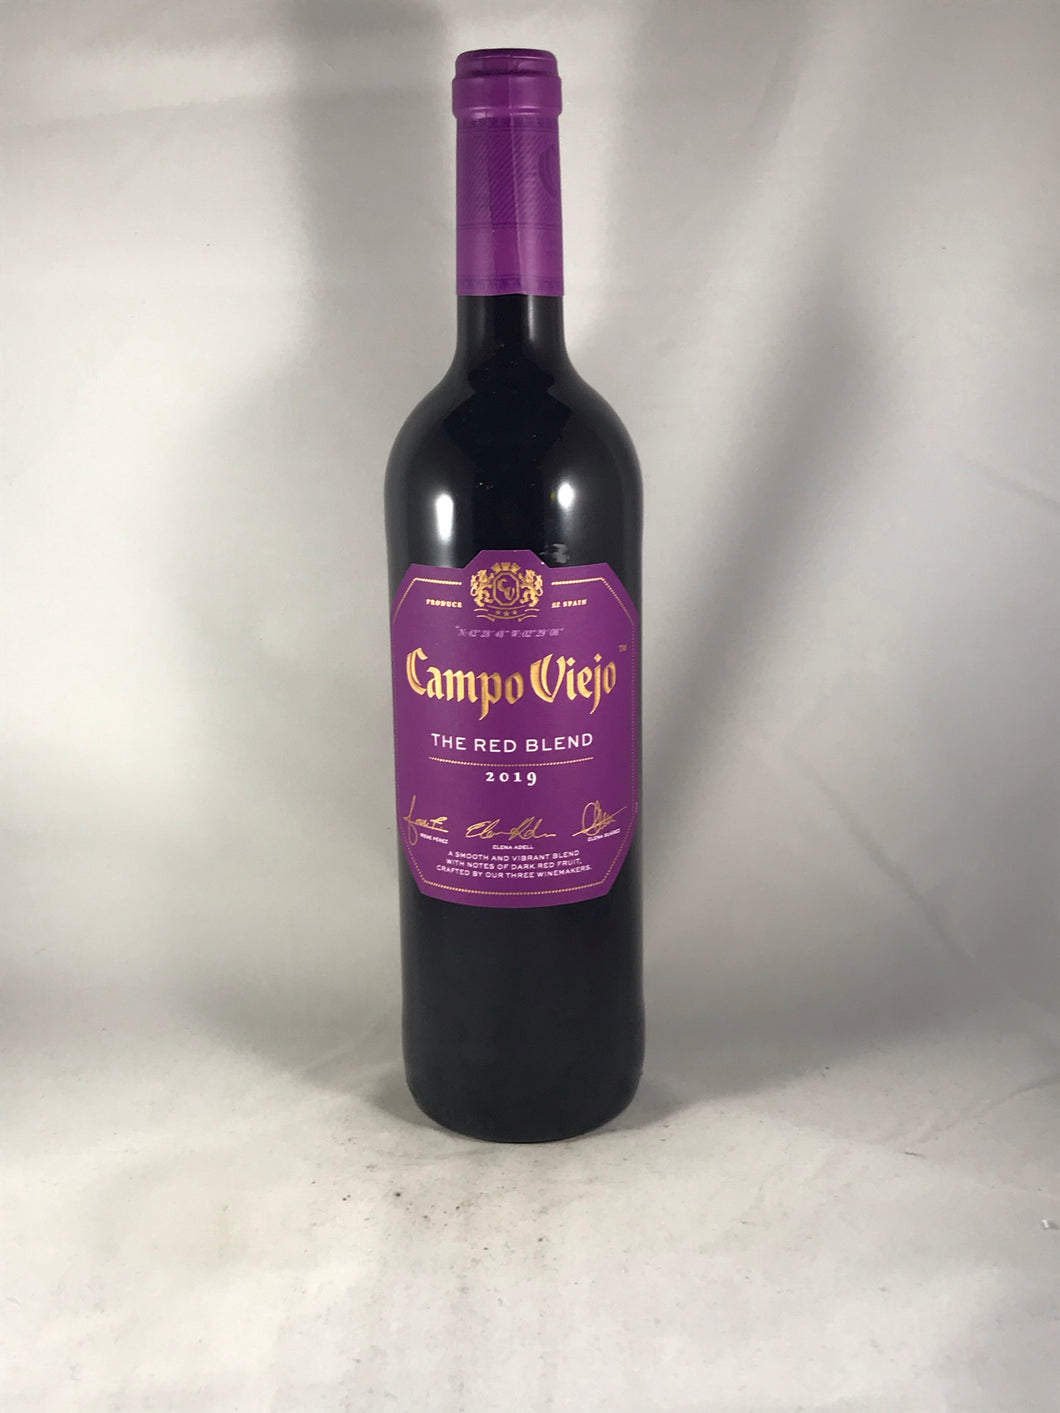 Bodegas Campo Viejo The Red Blend 2019, Spain